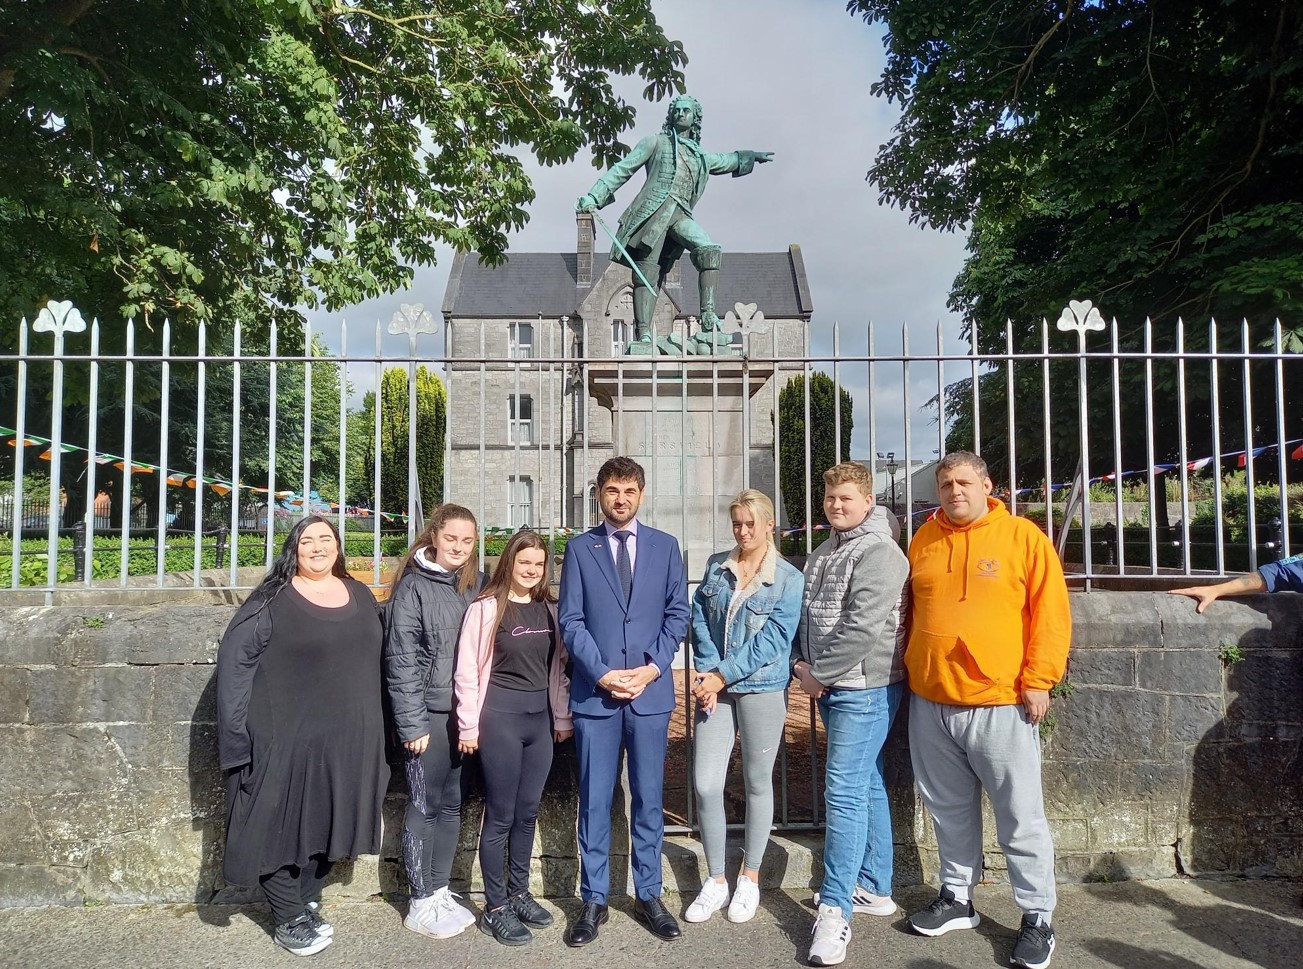 Garryowen Youth Committee - Dr. Loic Guyon, Honary Counsel of France with the Garryowen Youth Committee.